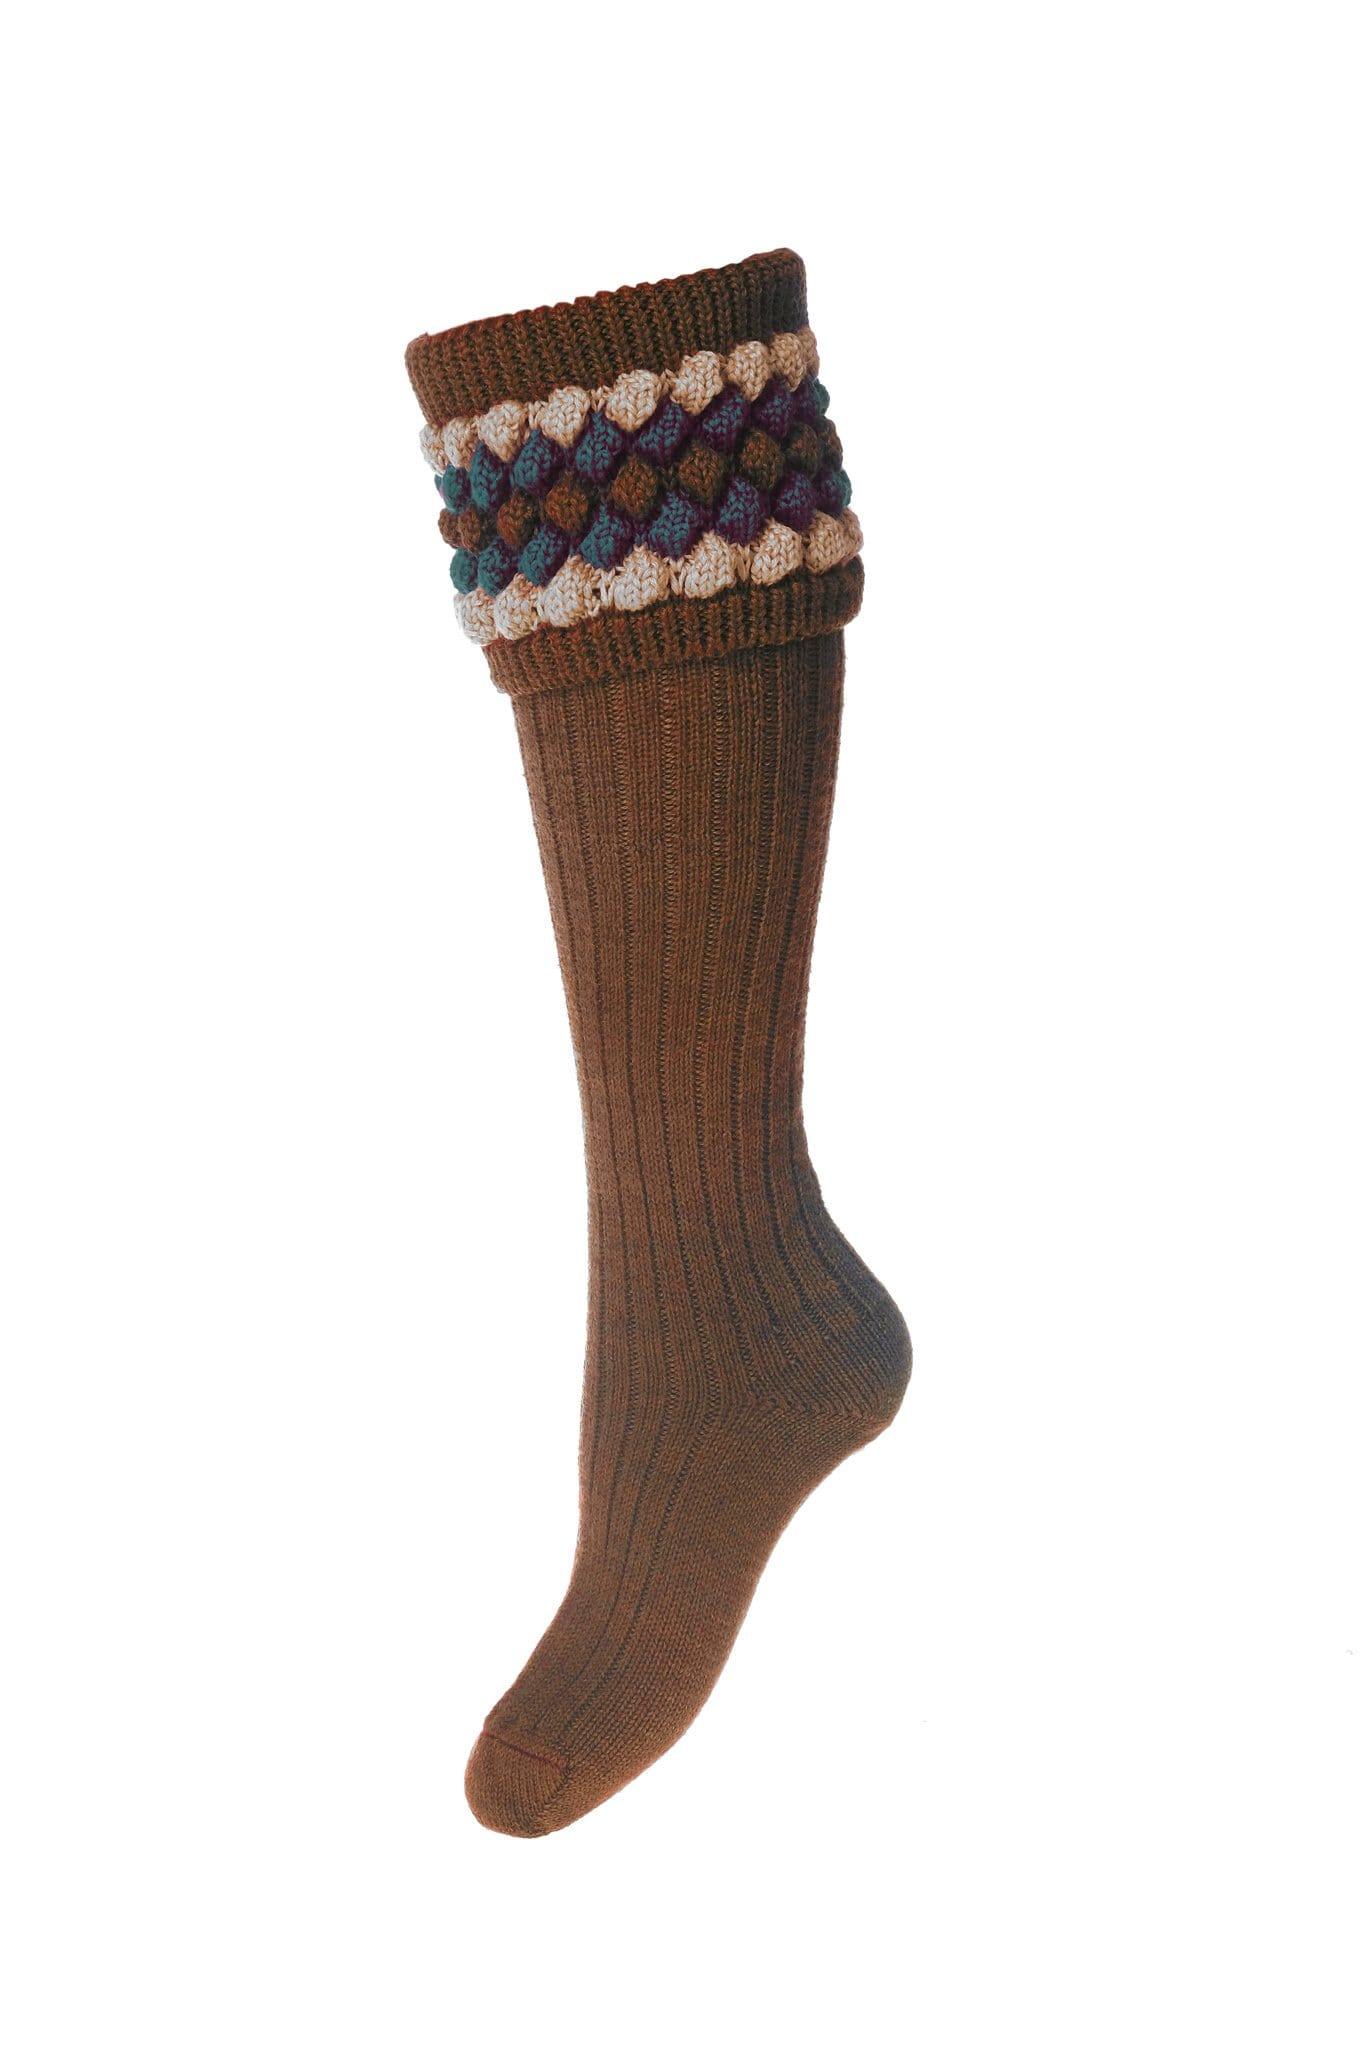 House of Cheviot Socks House of Cheviot Lady Angus Ladies Shooting Socks in Mid Brown/Teal